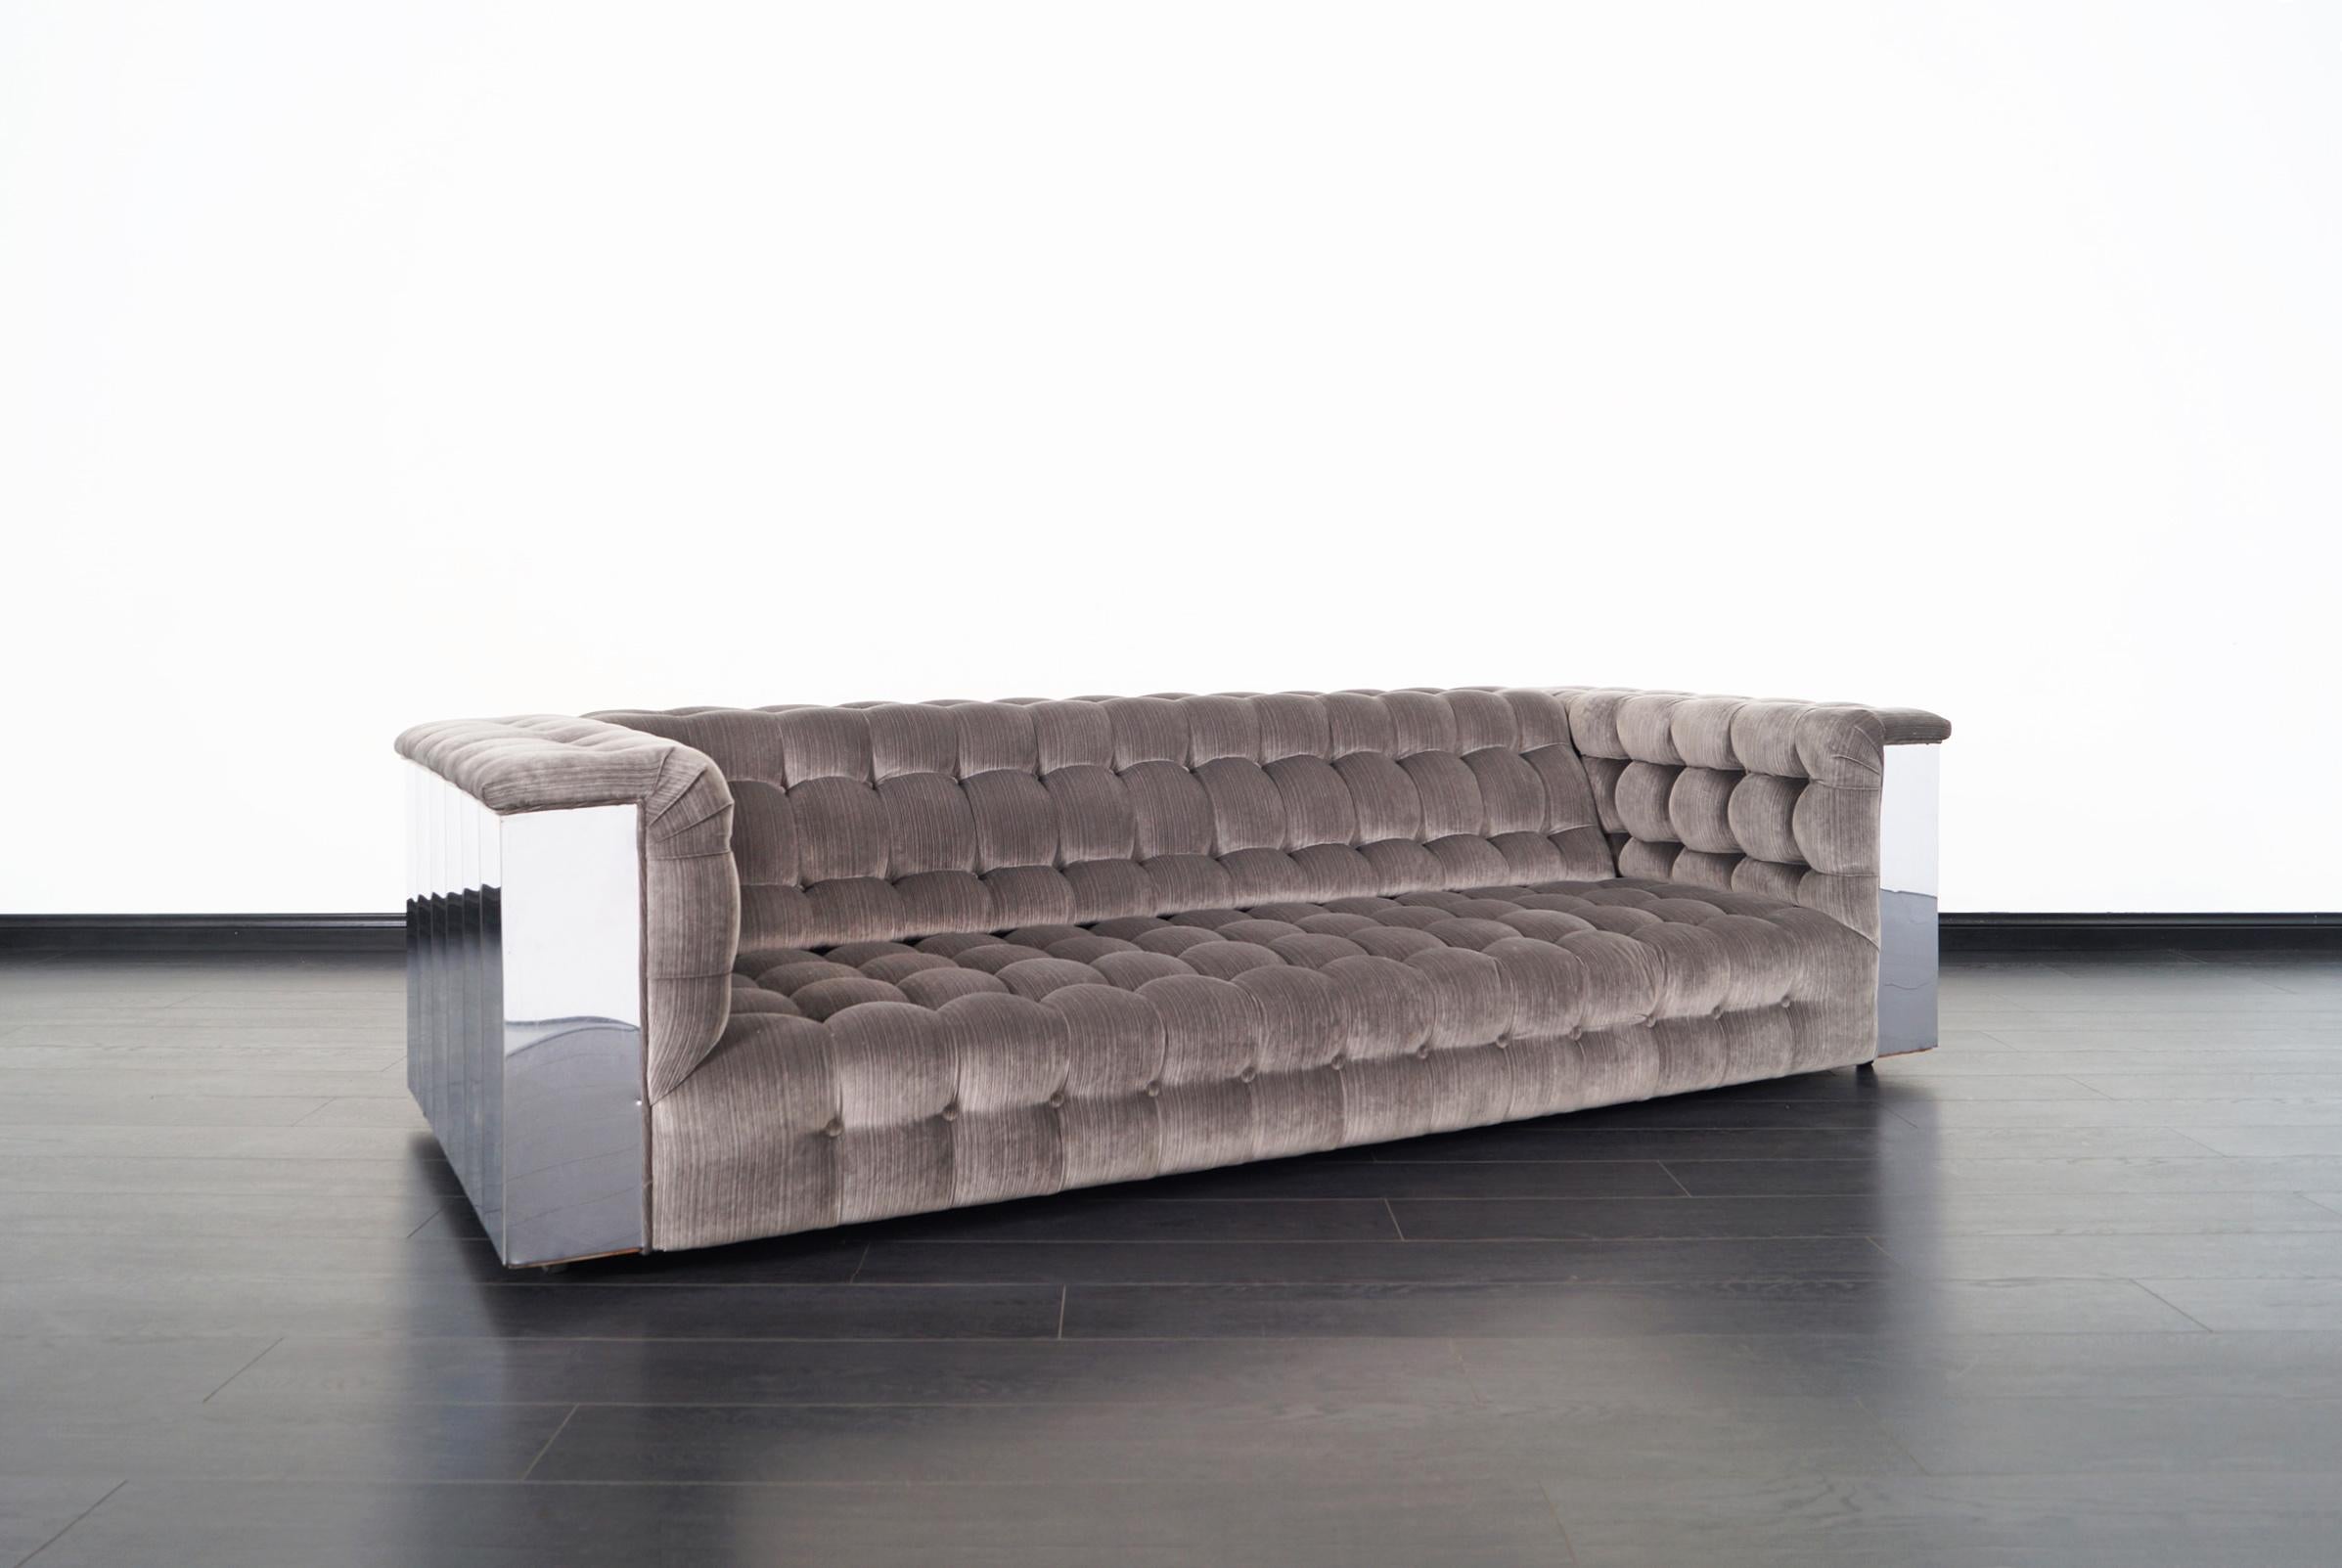 Amazing vintage chrome “Cityscape” sofa in the manner of Paul Evans and manufactured in the United States, circa 1960s. Features an exceptional design where the chrome frame that surrounds the sofa stands out, which causes the reflection of the